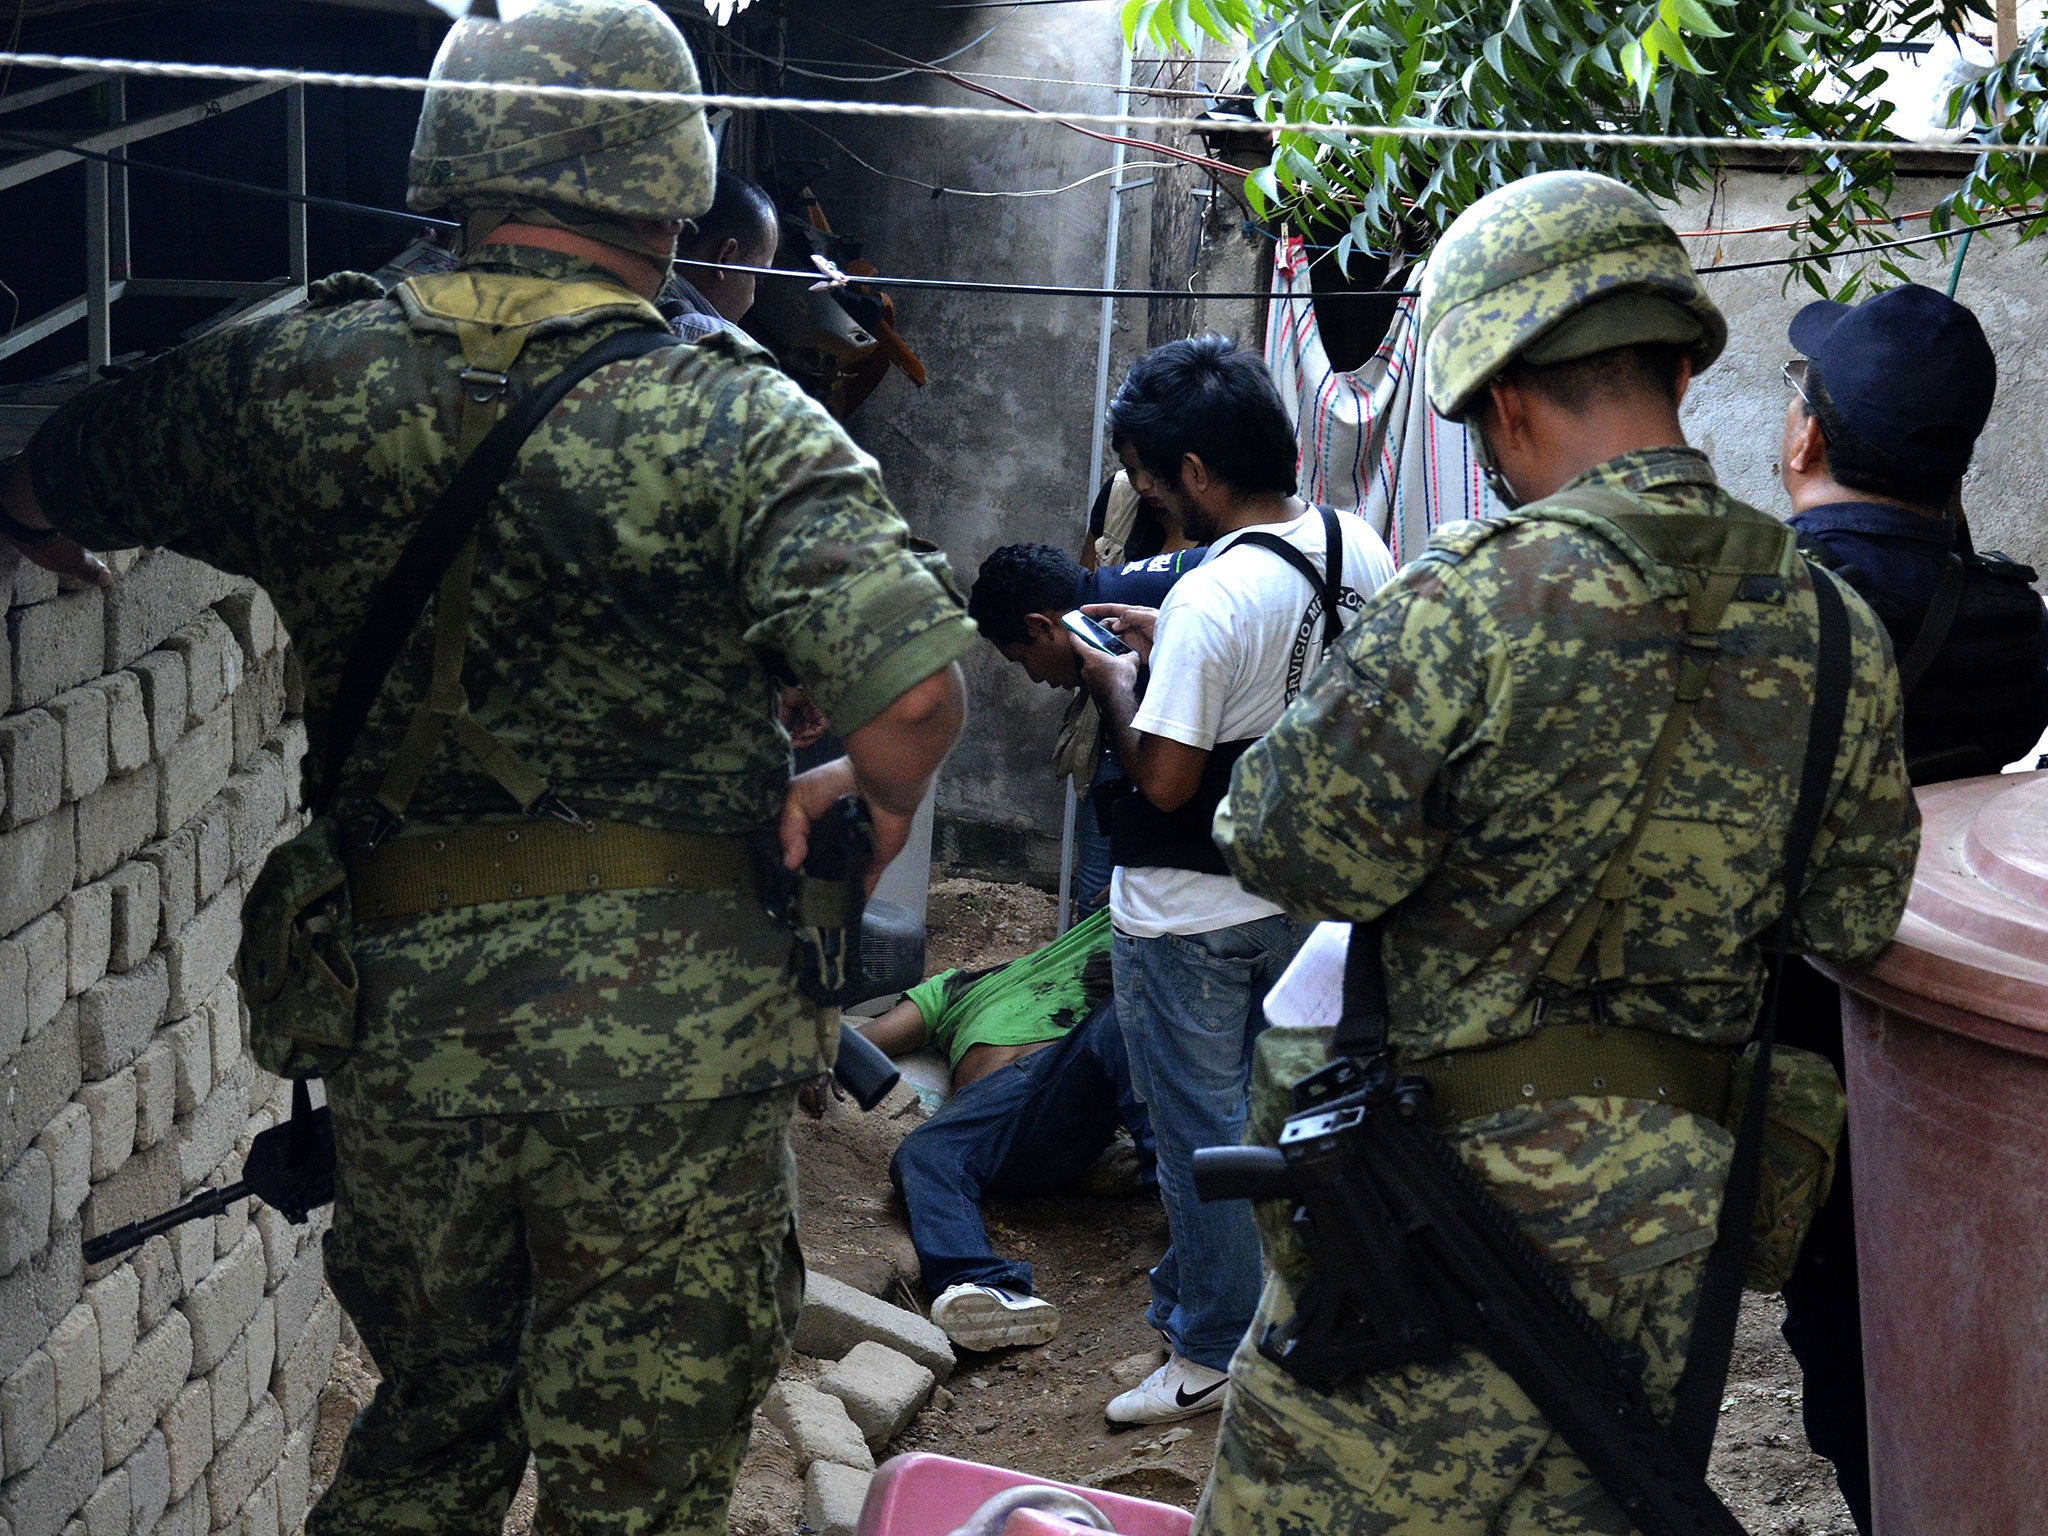 Mexican soldiers and forensic personnel work at a crime scene in Acapulco, Guerrero State, Mexico on 8 November, 2015